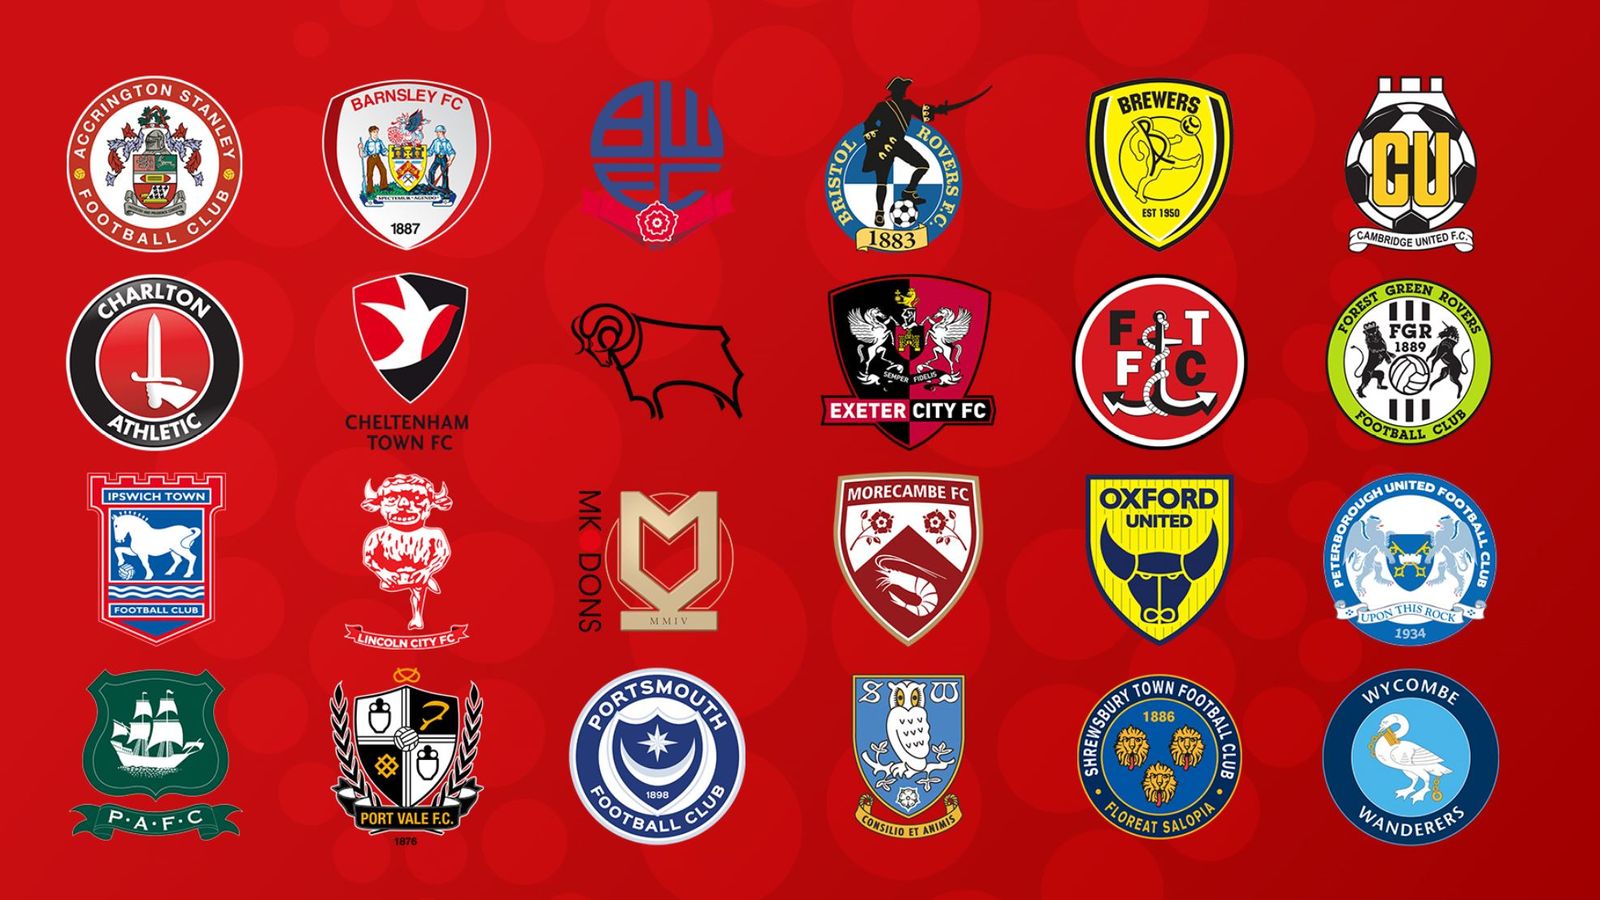 League One 2022/23 fixtures, dates and schedule: Derby vs Oxford and Sheffield Wednesday vs Portsmouth on opening weekend